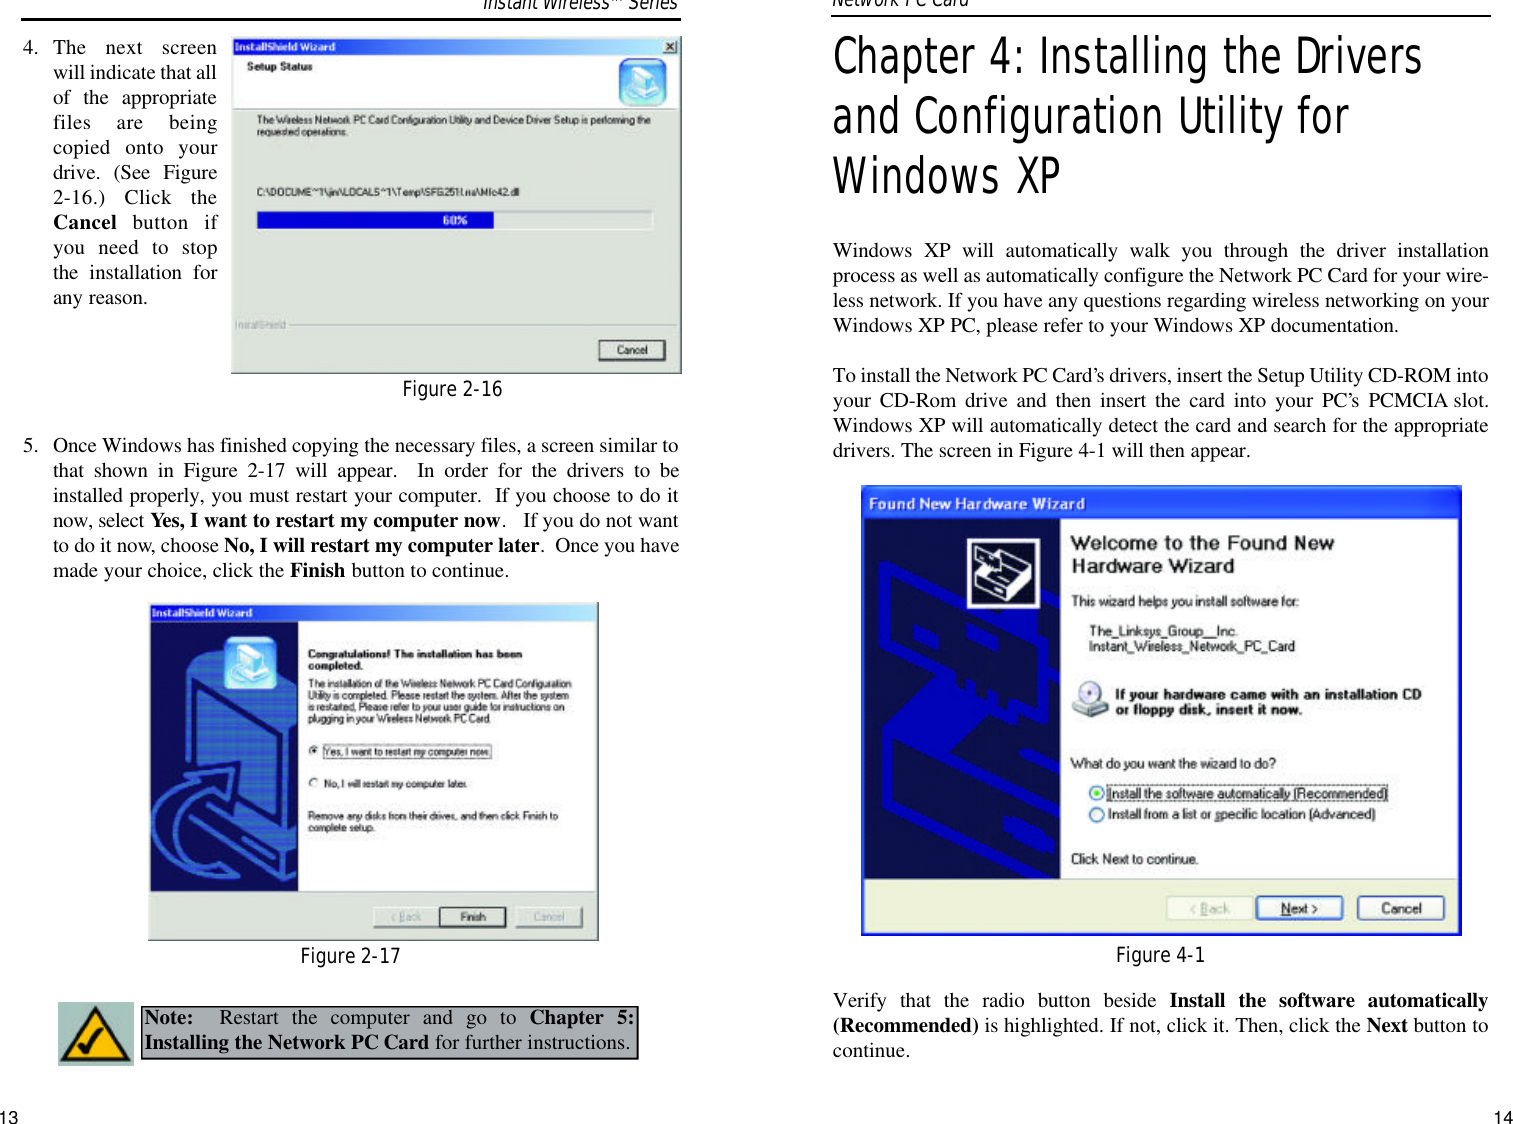 Chapter 4: Installing the Driversand Configuration Utility forWindows XPWindows XP will automatically walk you through the driver installationprocess as well as automatically configure the Network PC Card for your wire-less network. If you have any questions regarding wireless networking on yourWindows XP PC, please refer to your Windows XP documentation.To install the Network PC Card’s drivers, insert the Setup Utility CD-ROM intoyour CD-Rom drive and then insert the card into your PC’s PCMCIA slot.Windows XP will automatically detect the card and search for the appropriatedrivers. The screen in Figure 4-1 will then appear.Verify that the radio button beside Install the software automatically(Recommended) is highlighted. If not, click it. Then, click the Next button tocontinue.144. The next screenwill indicate that allof the appropriatefiles are beingcopied onto yourdrive. (See Figure2-16.) Click theCancel button ifyou need to stopthe installation forany reason.  5.  Once Windows has finished copying the necessary files, a screen similar tothat shown in Figure 2-17 will appear.  In order for the drivers to beinstalled properly, you must restart your computer.  If you choose to do itnow, select Yes, I want to restart my computer now.   If you do not wantto do it now, choose No, I will restart my computer later.  Once you havemade your choice, click the Finish button to continue. Network PC Card Figure 2-16Figure 2-17Note: Restart the computer and go to Chapter 5:Installing the Network PC Card for further instructions.Figure 4-1Instant WirelessTMSeries13